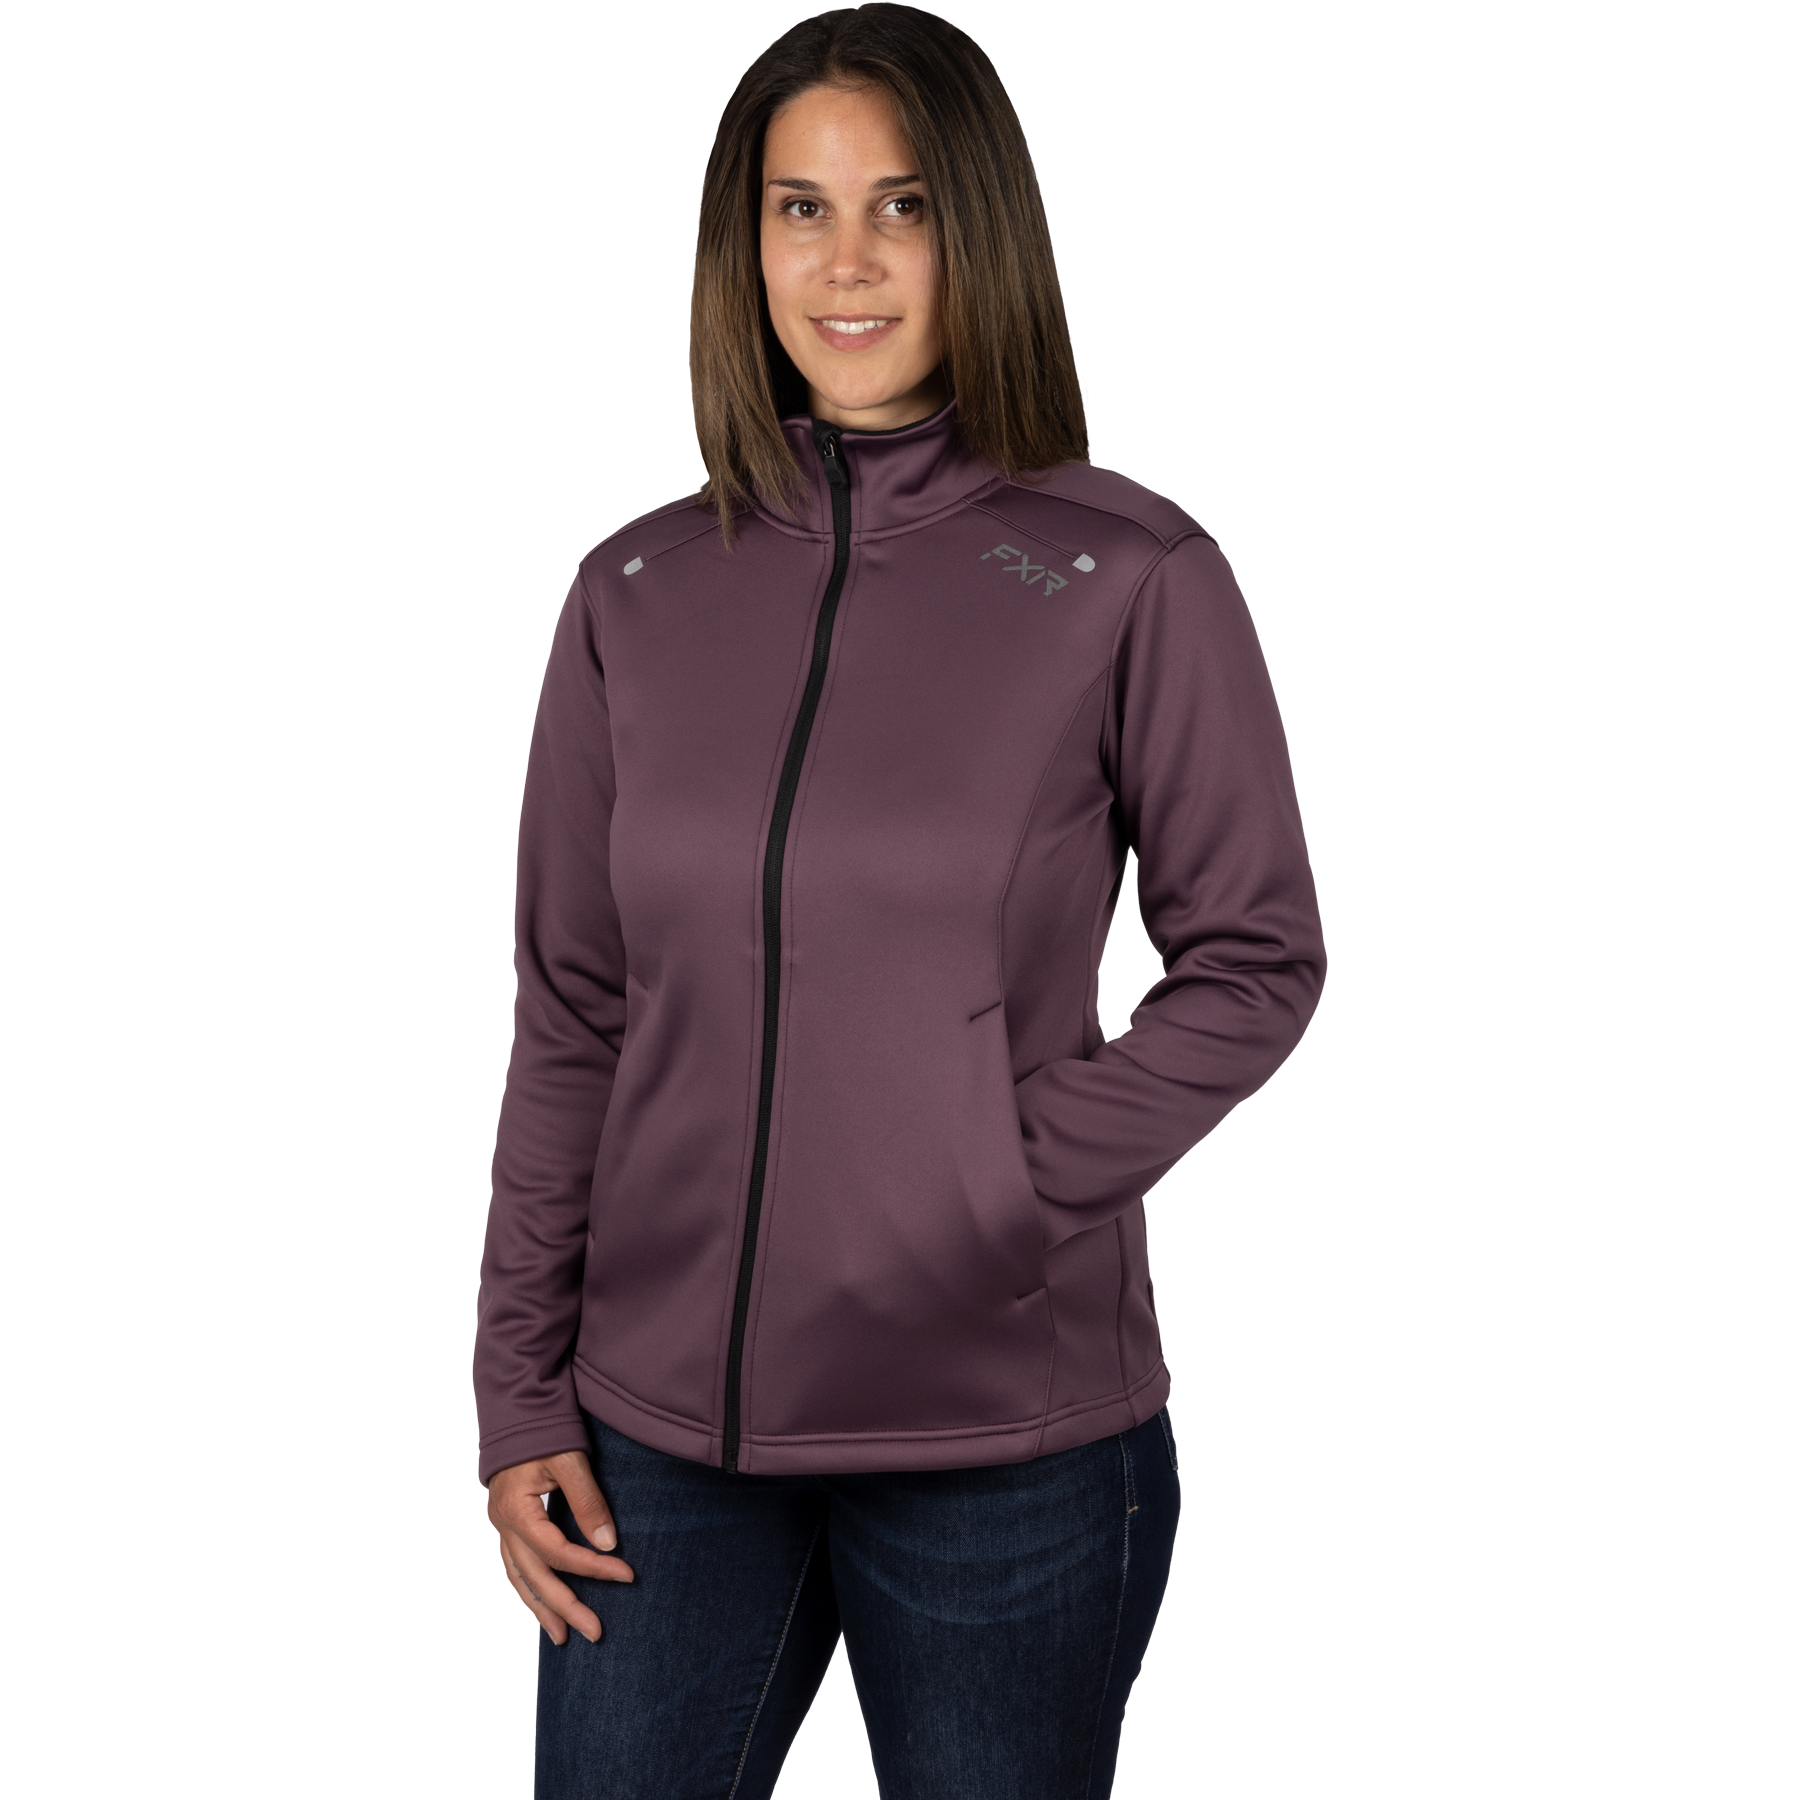 fxr racing jackets for womens elevation tech zip up